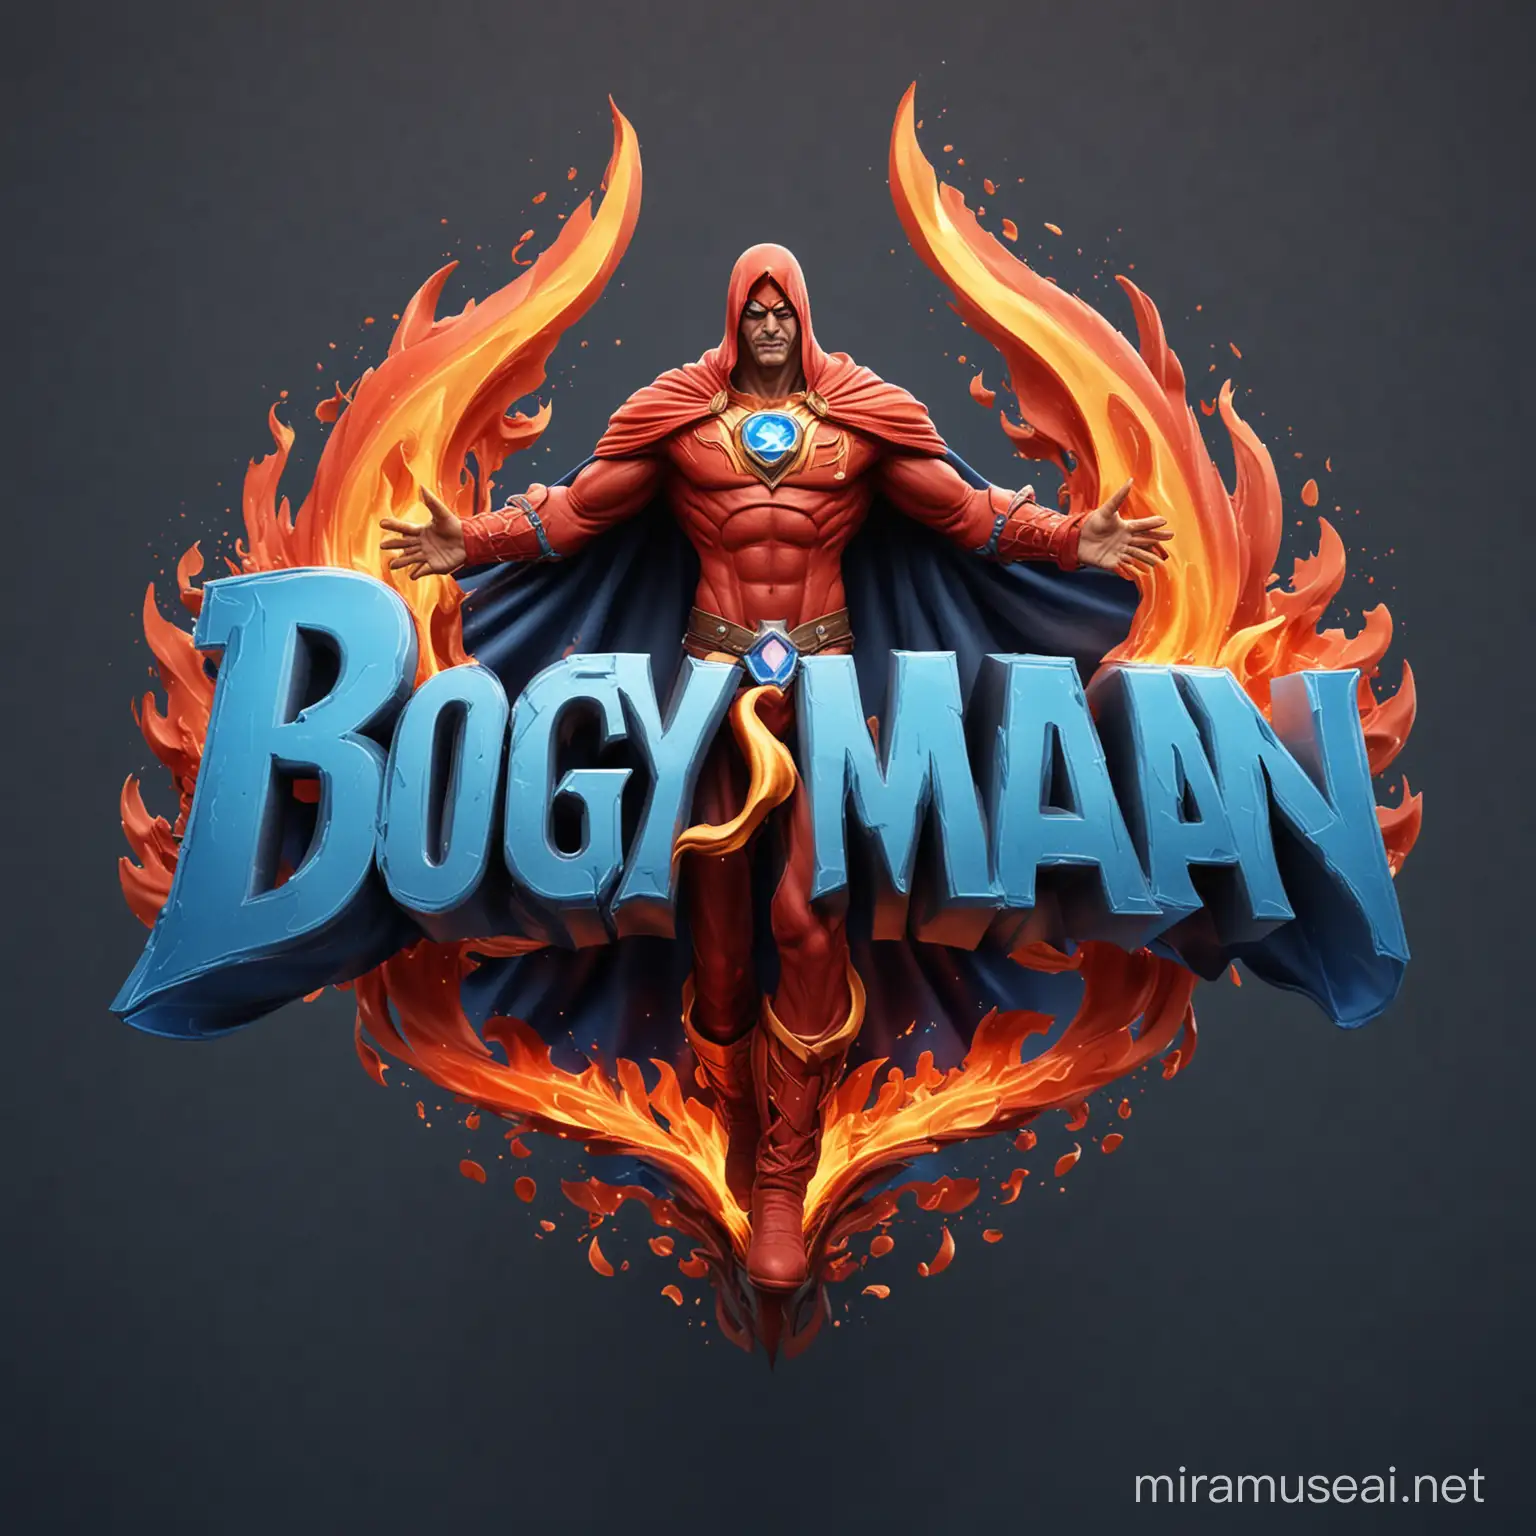 3d logo, man with flaming cape,flame red and blue with name written "Bogyman"